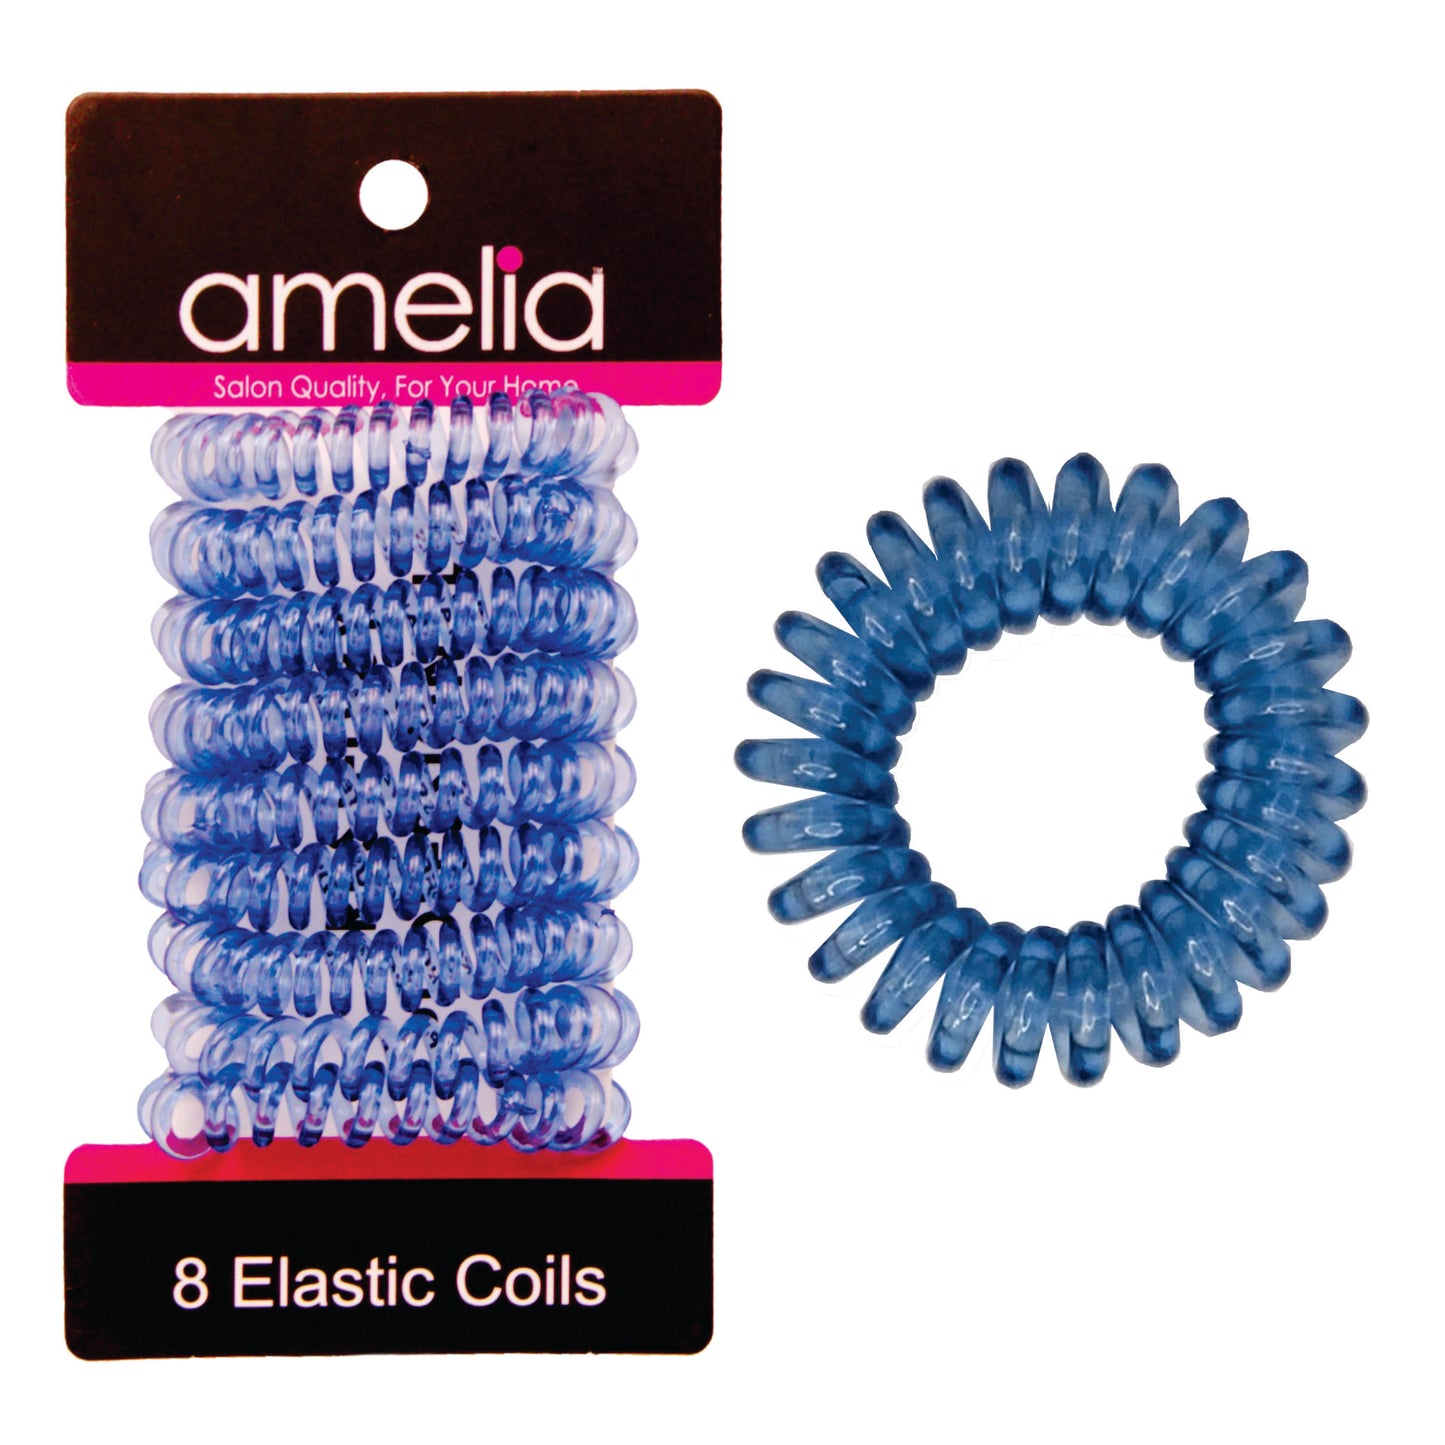 Amelia Beauty Products 8 Small Elastic Hair Coils, 1.5in Diameter Thick Spiral Hair Ties, Gentle on Hair, Strong Hold and Minimizes Dents and Creases, Blue